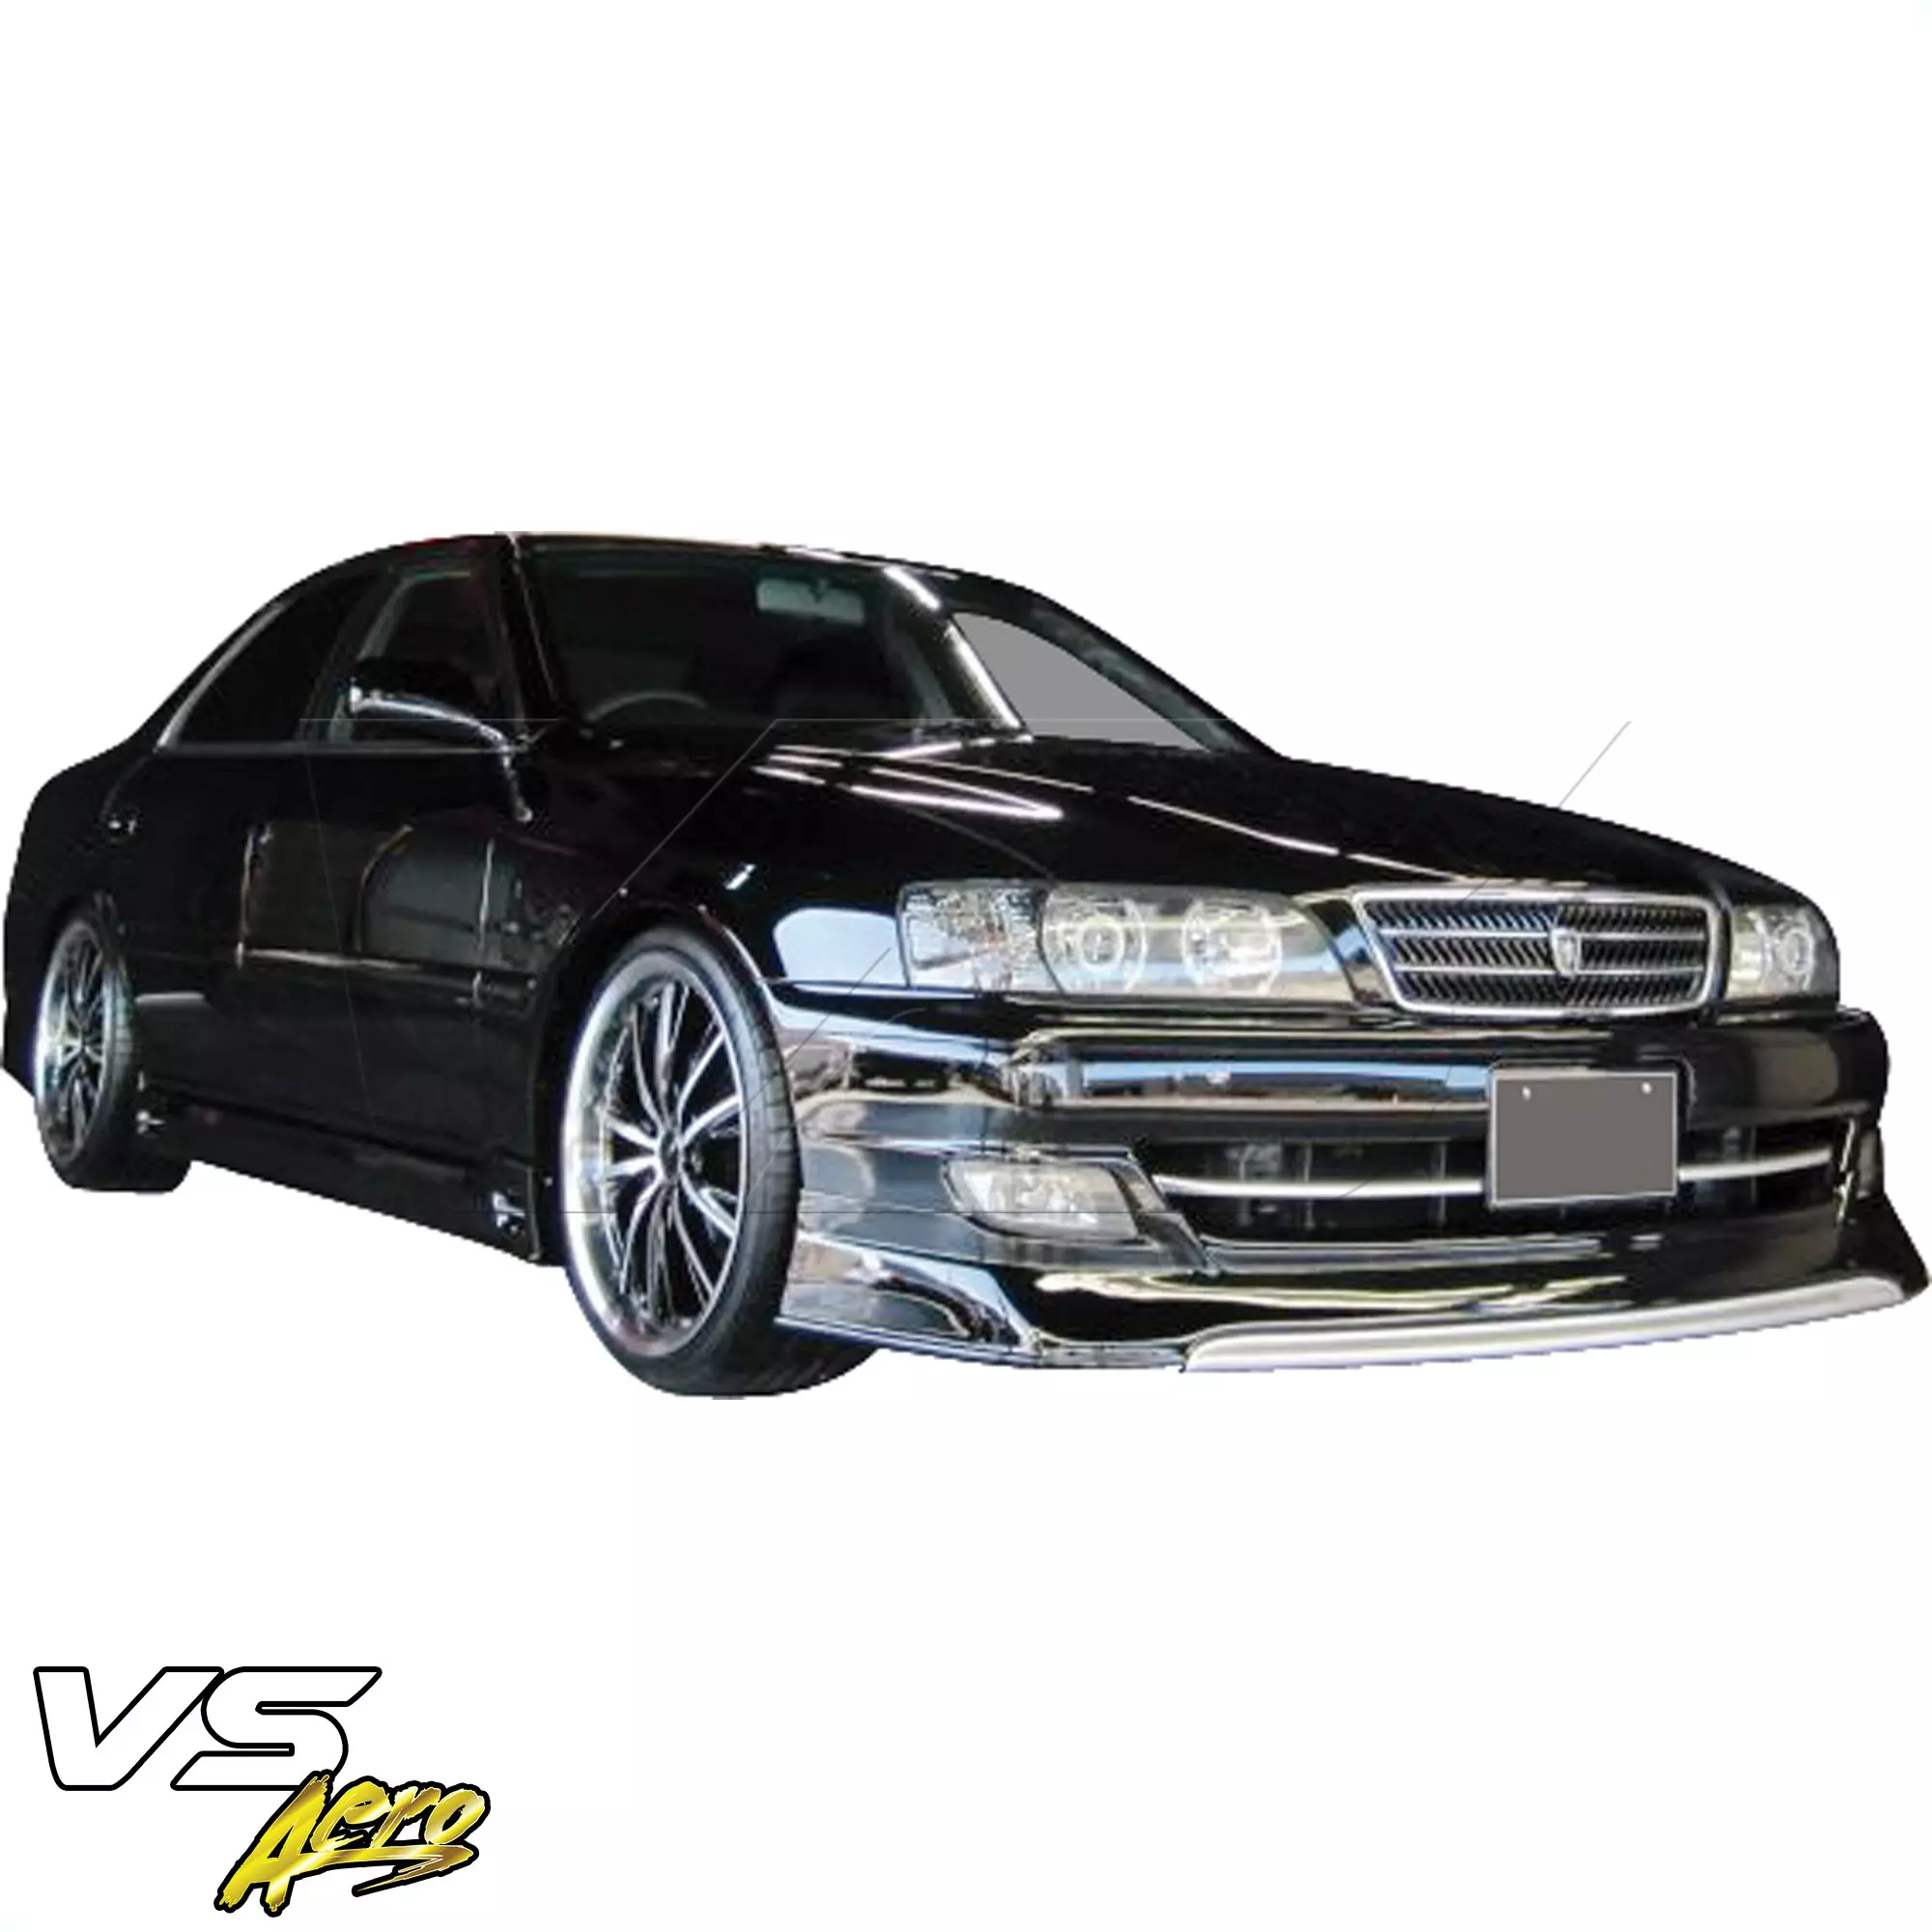 VSaero FRP TRAU Late Front Lip Valance > Toyota Chaser JZX100 1999-2000 - Image 19